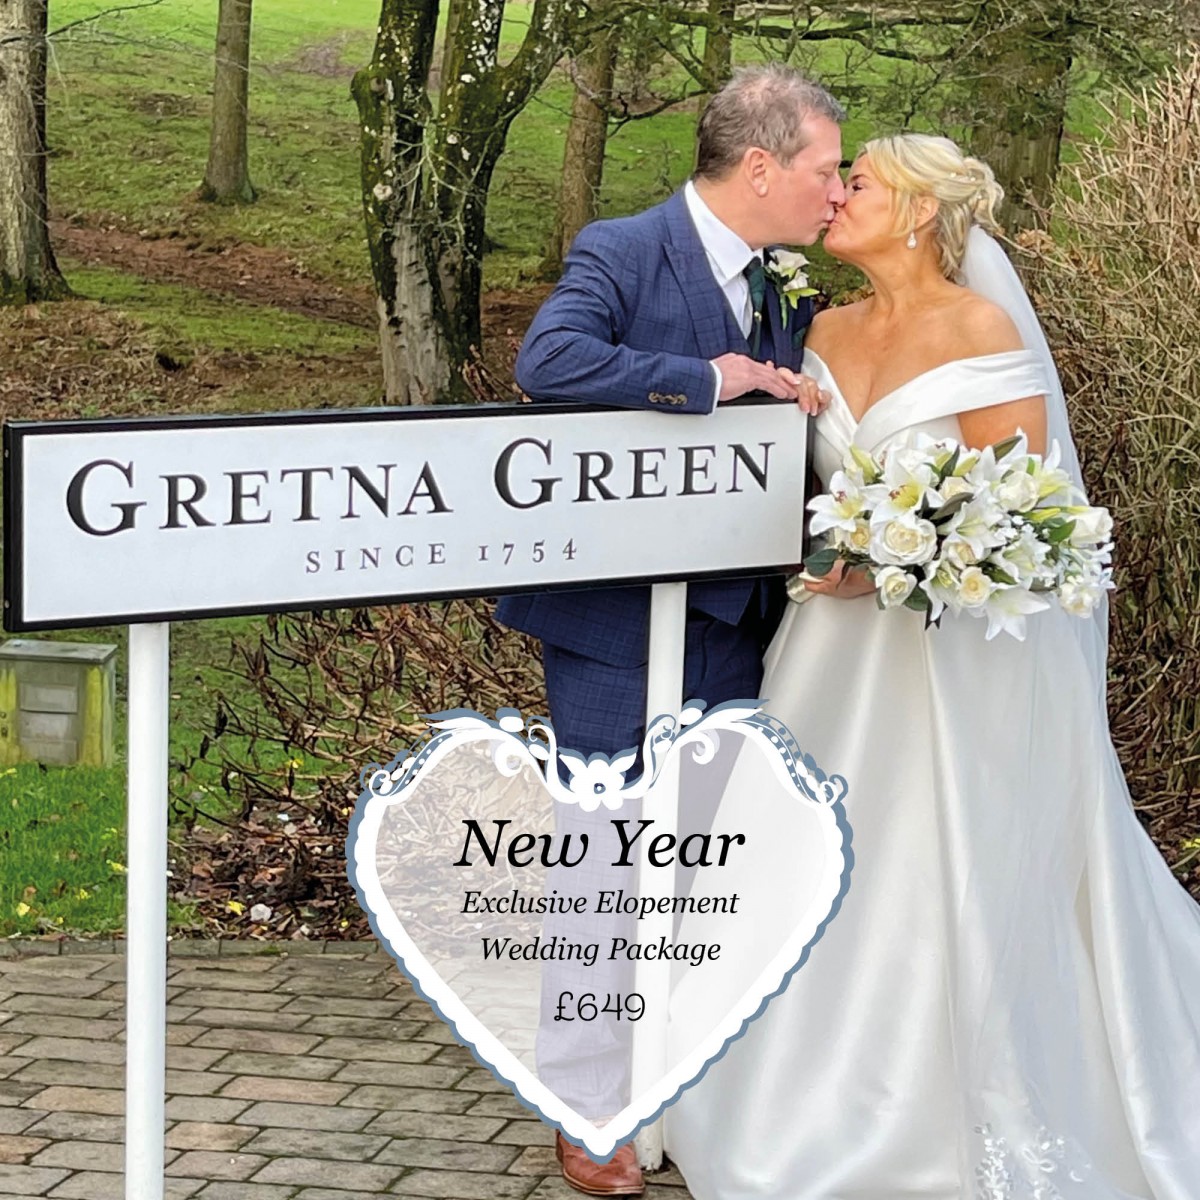 New Year Wedding Package at Gretna Hall